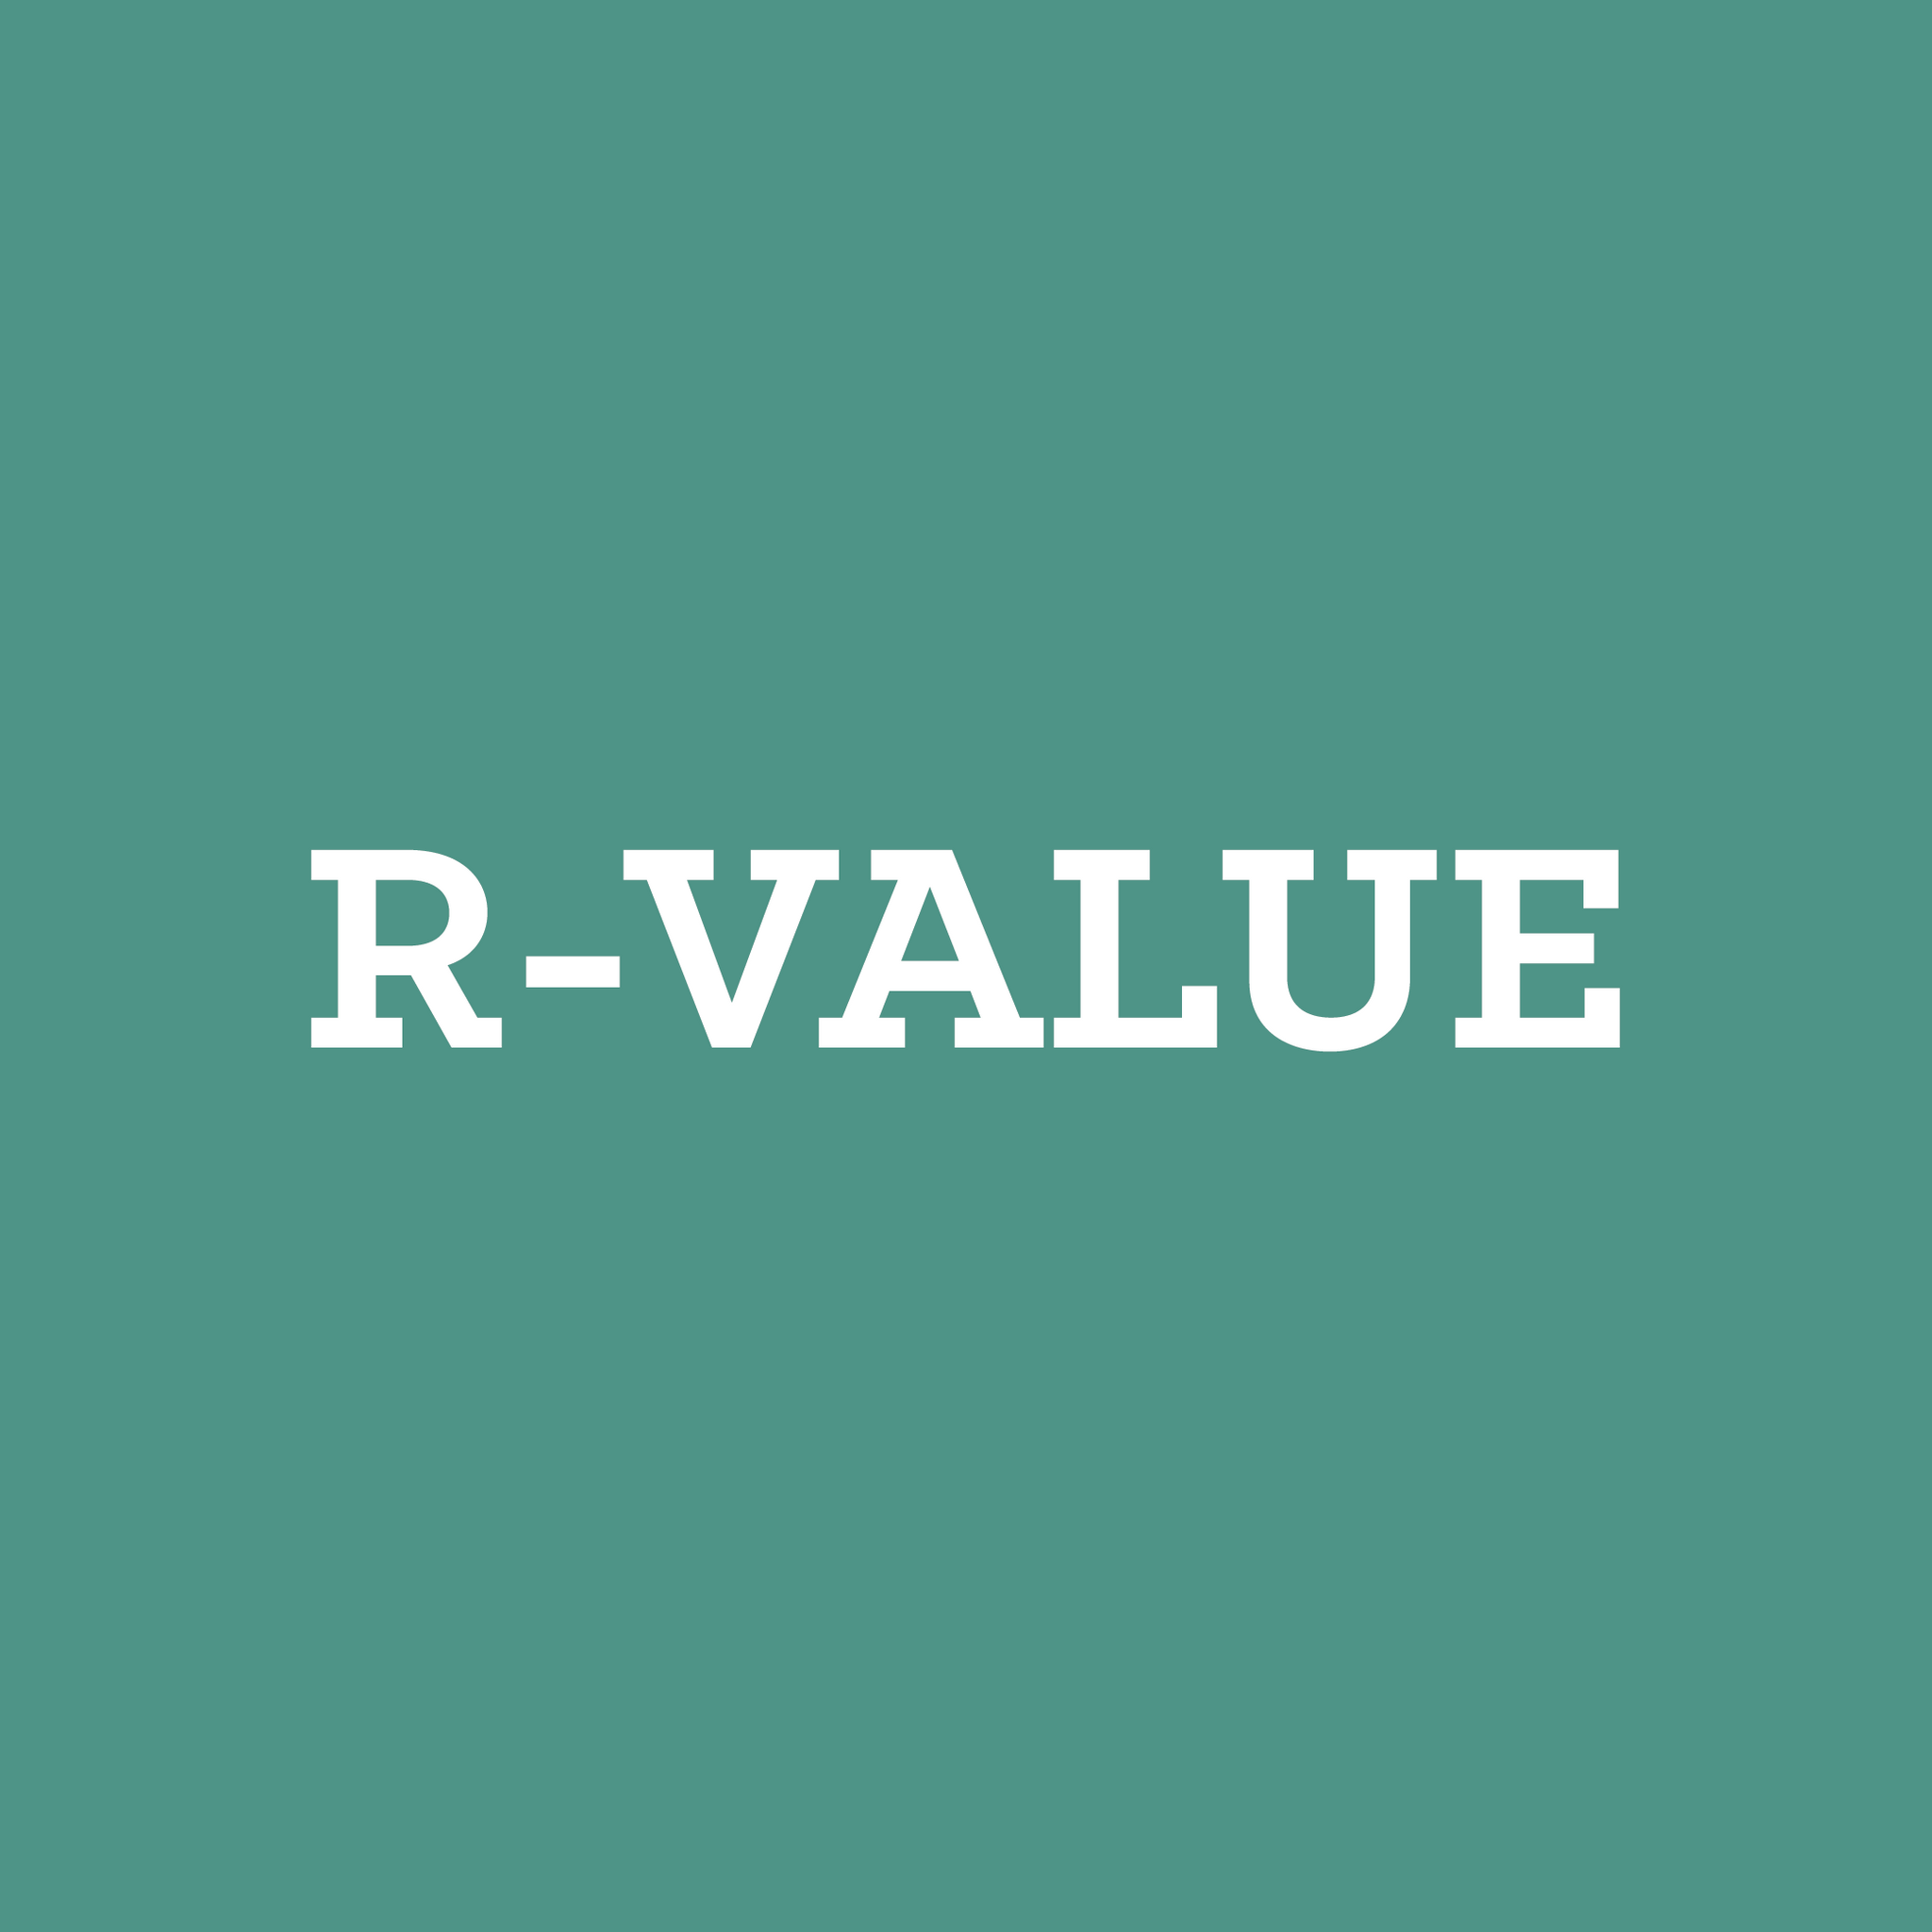 What is the R-Value and how is it measured?